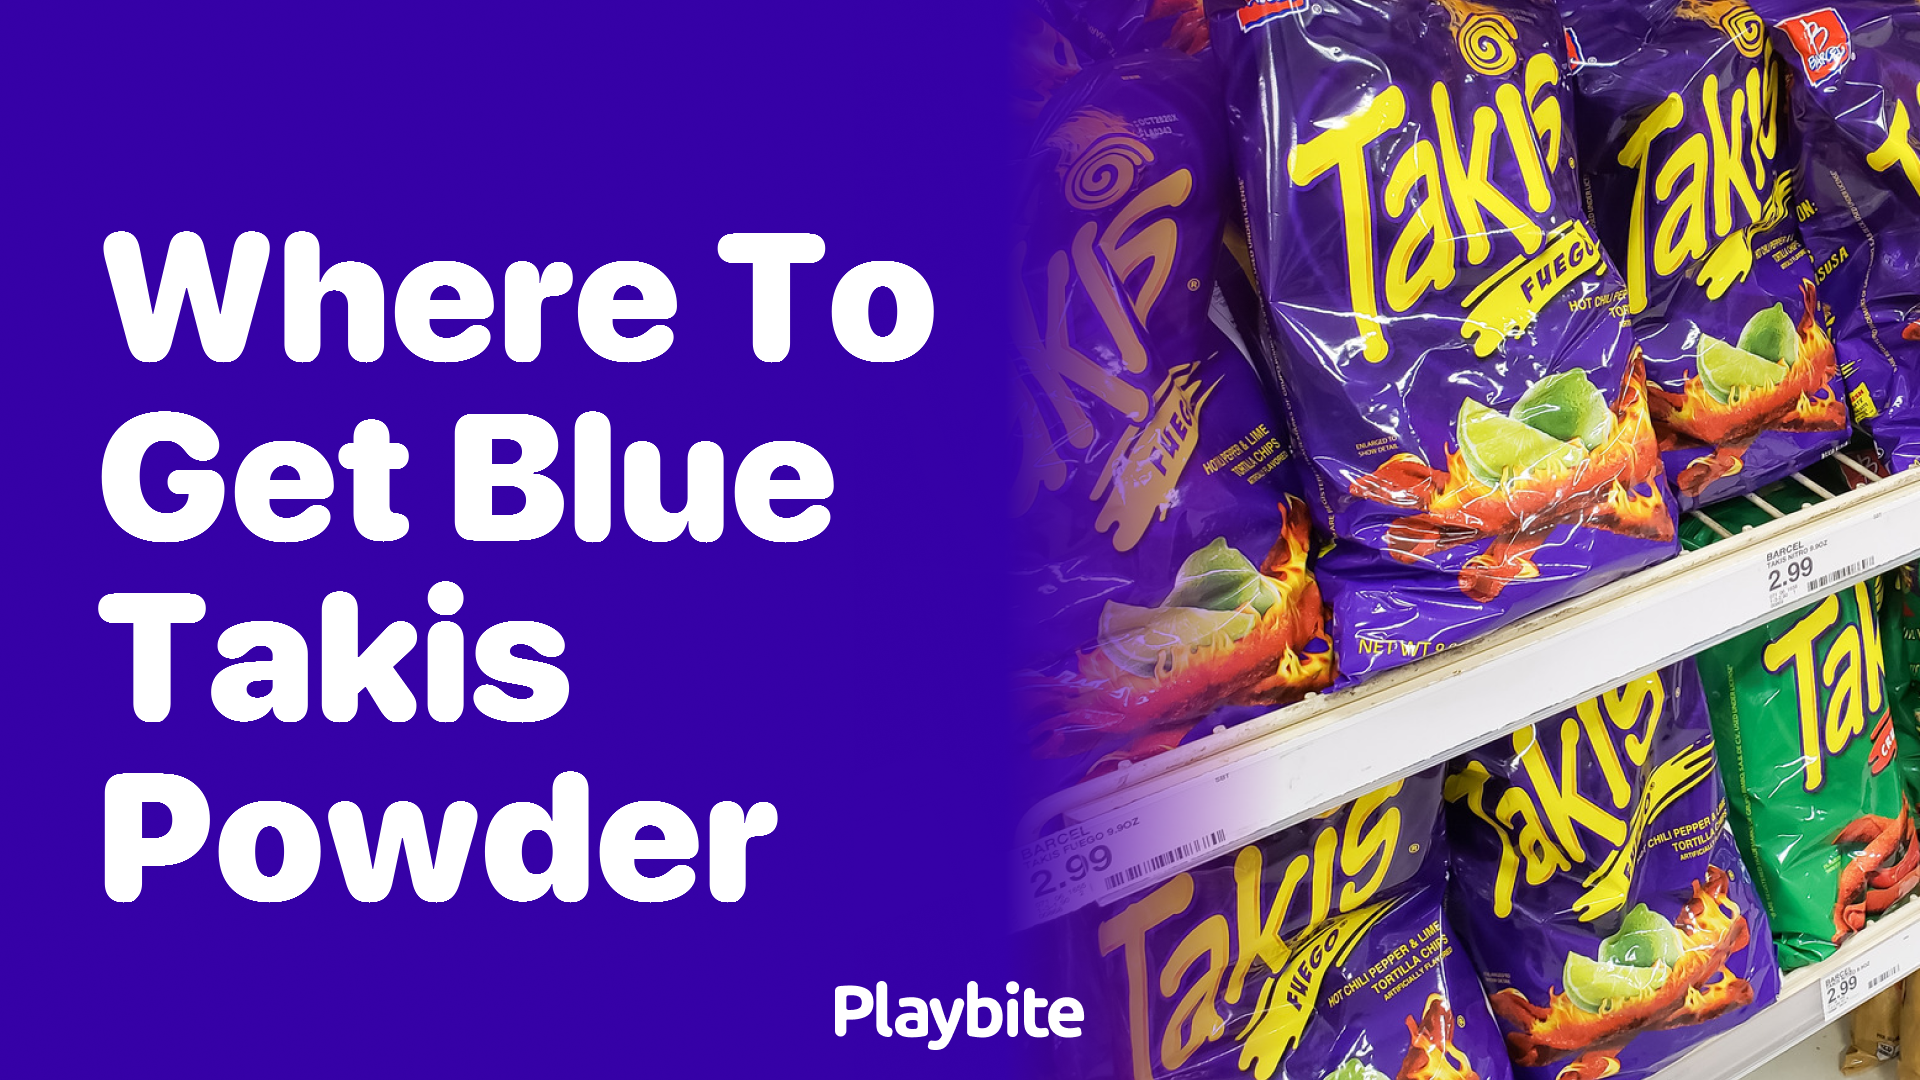 Where to Get Blue Takis Powder: A Hot Tip for Spicy Snack Lovers